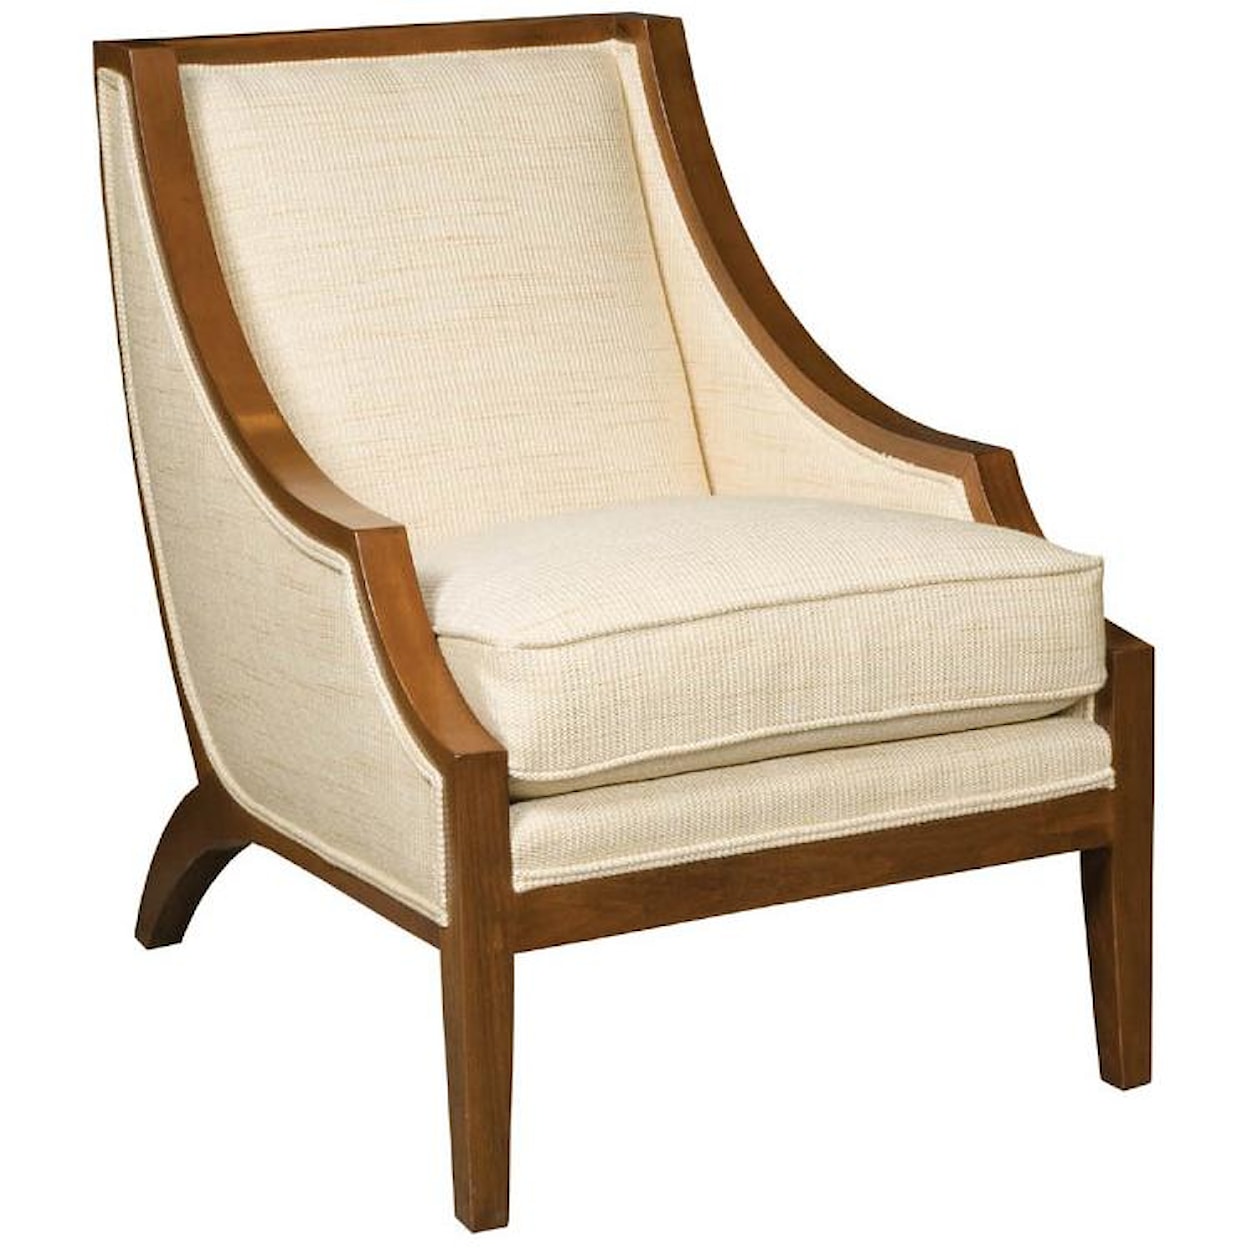 Vanguard Furniture Thom Filicia Home Collection Pompey Transitional Exposed Wood Chair